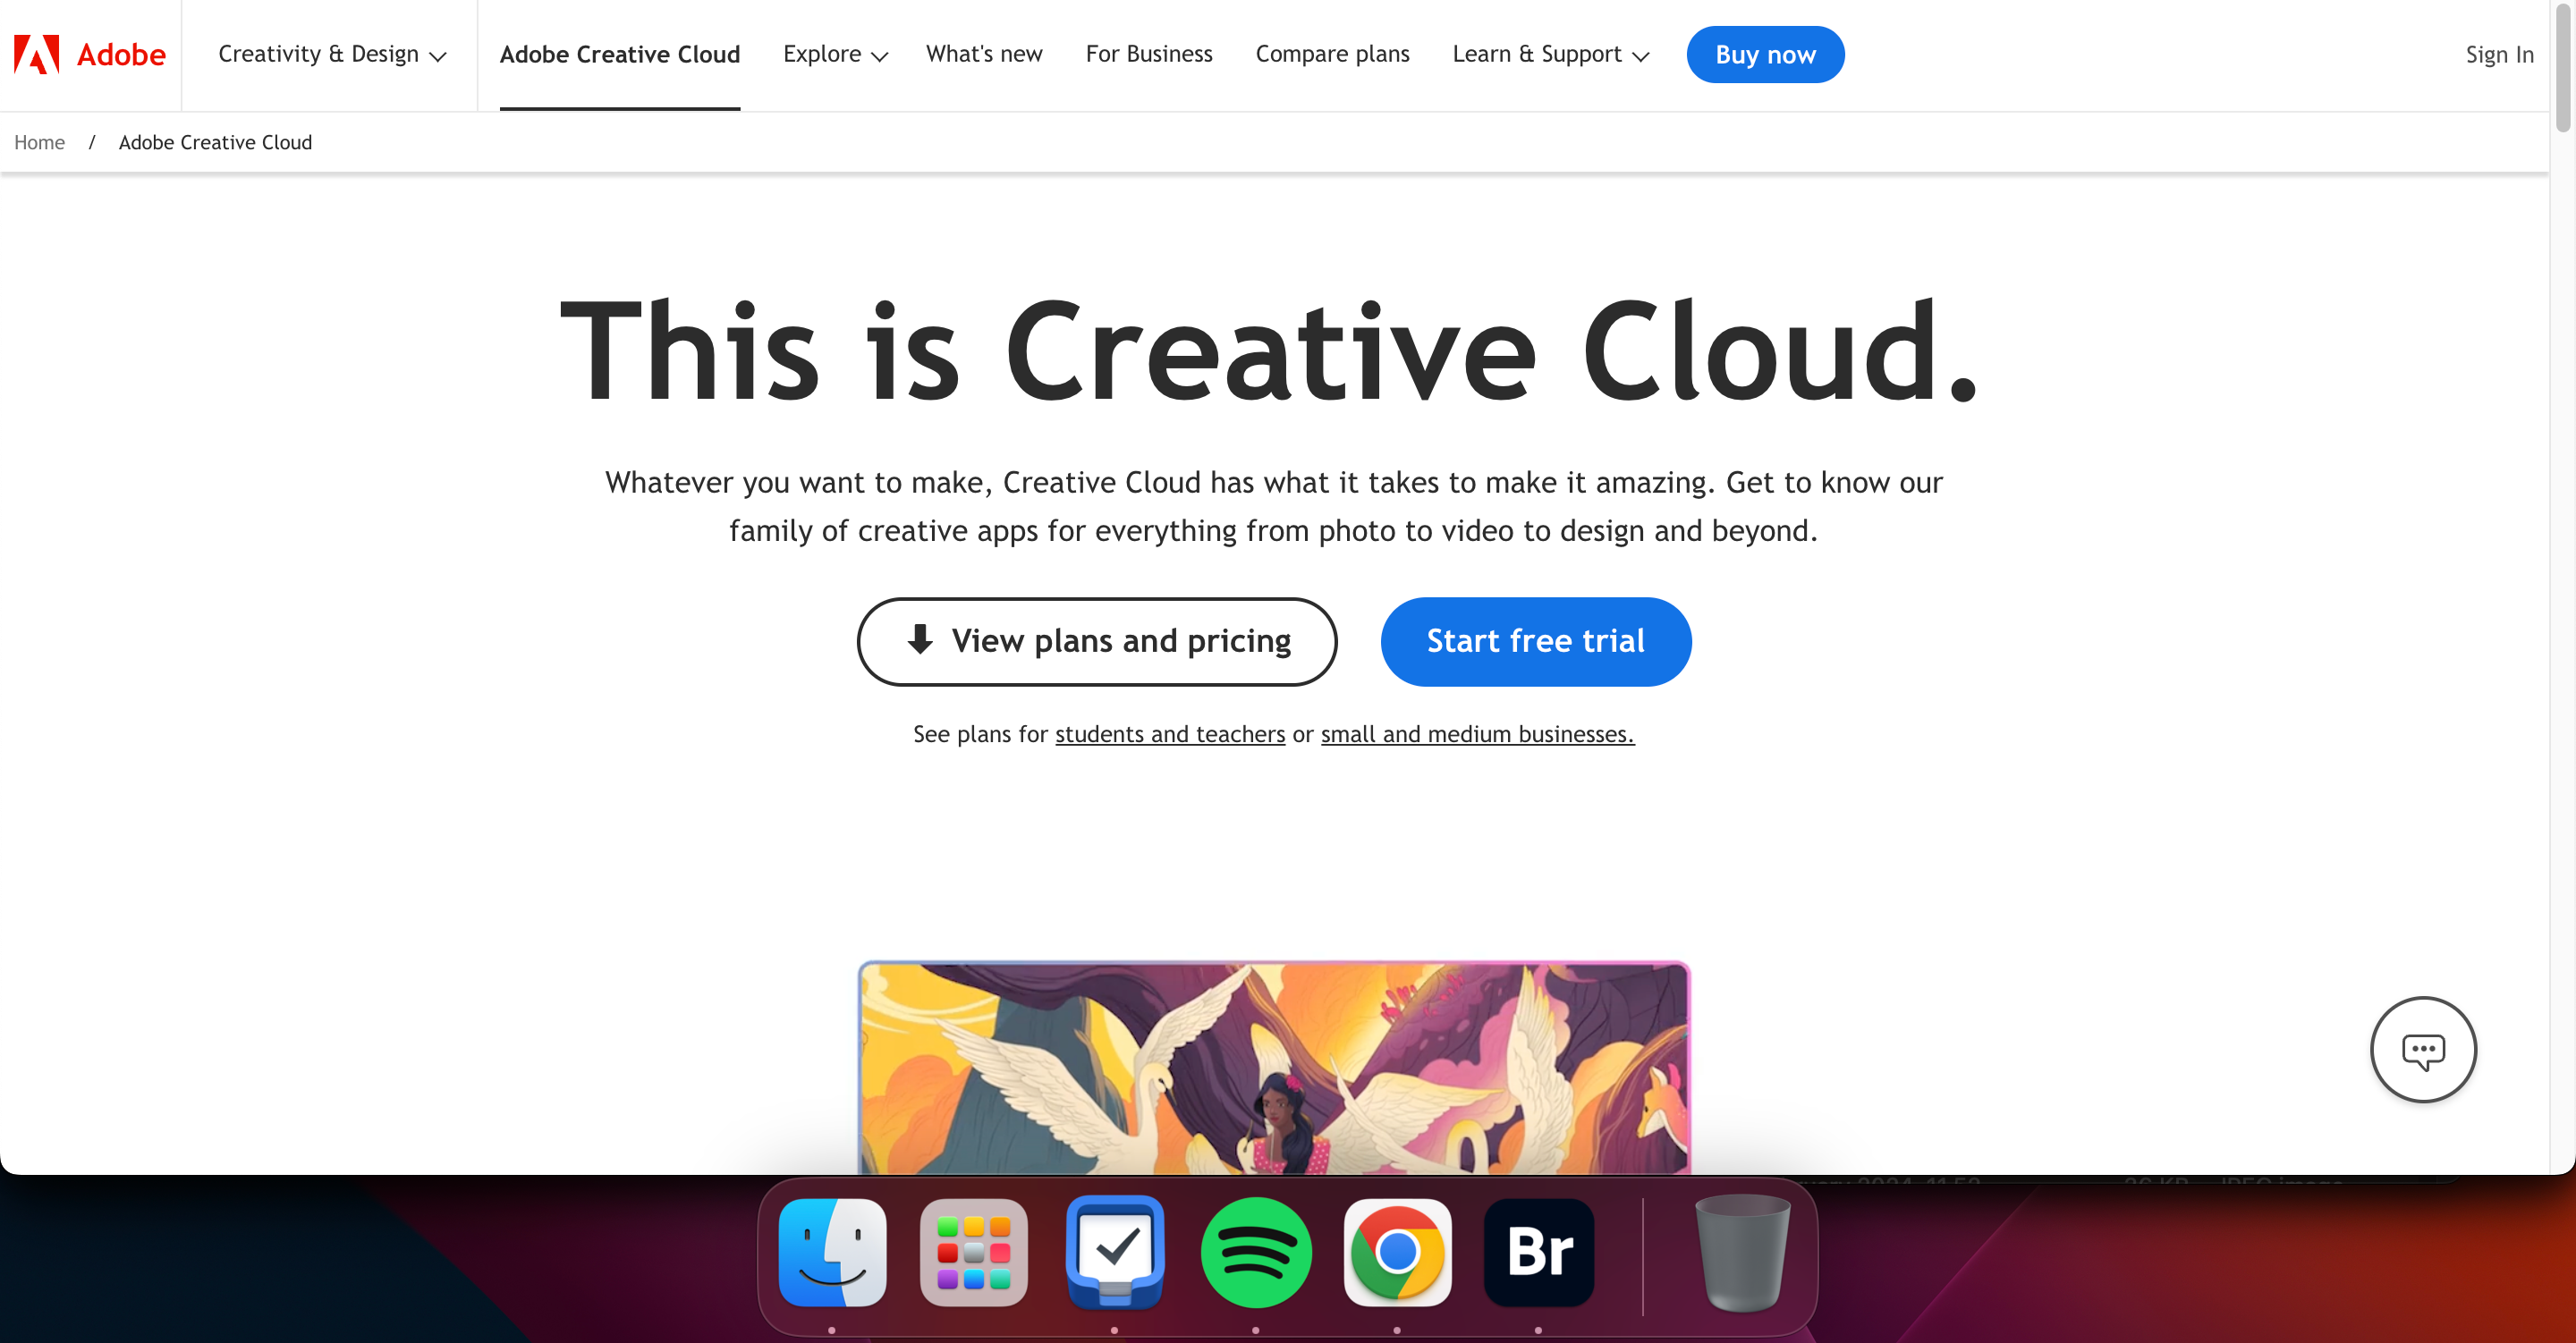 The homepage on the Adobe Creative Cloud website